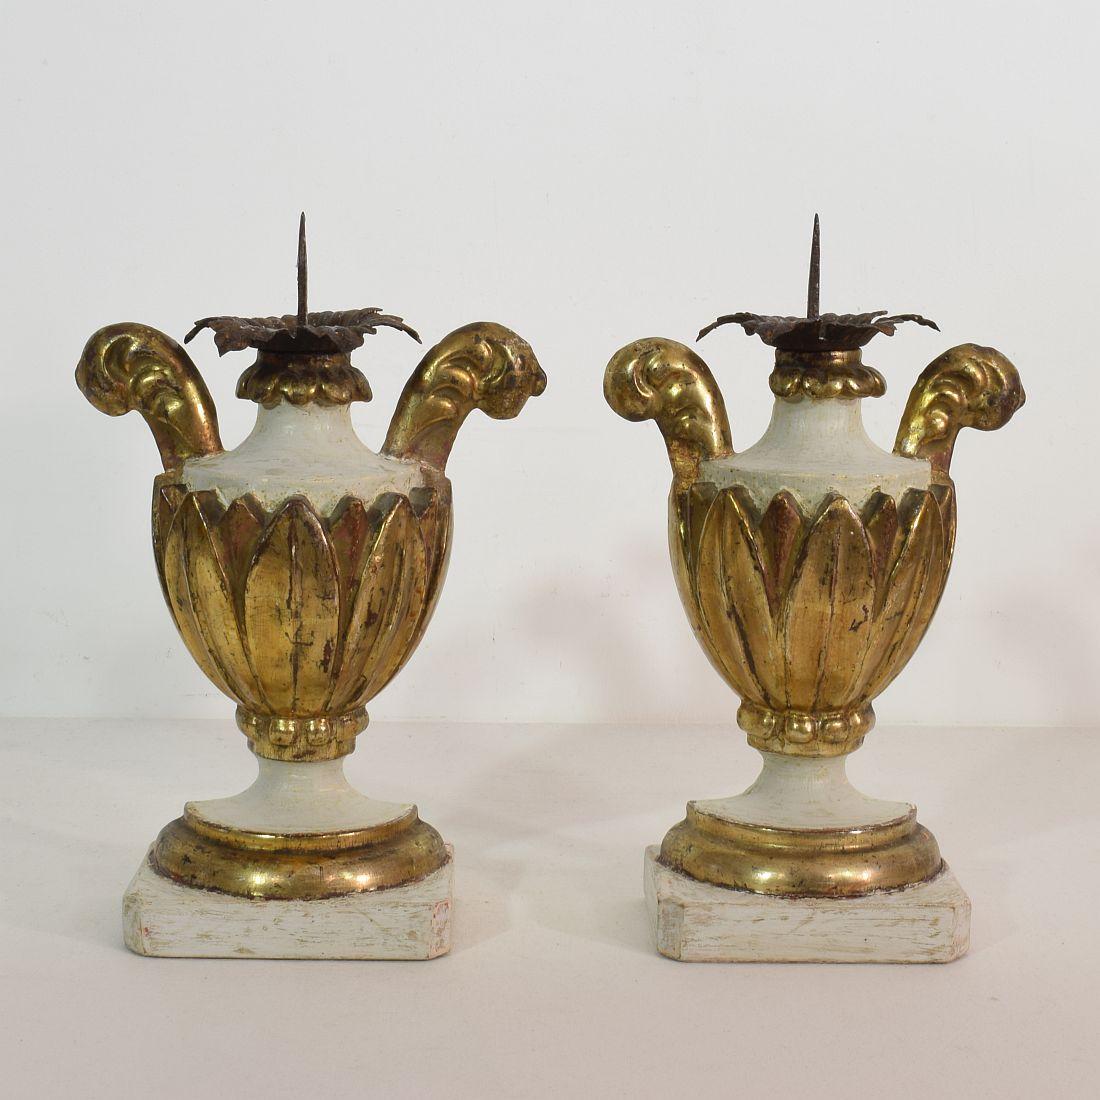 Unique and small pair of neoclassical altar candleholders with beautiful color and gold,
Italy, circa 1760-1780. Weathered, small losses and old repairs. Measurement each.